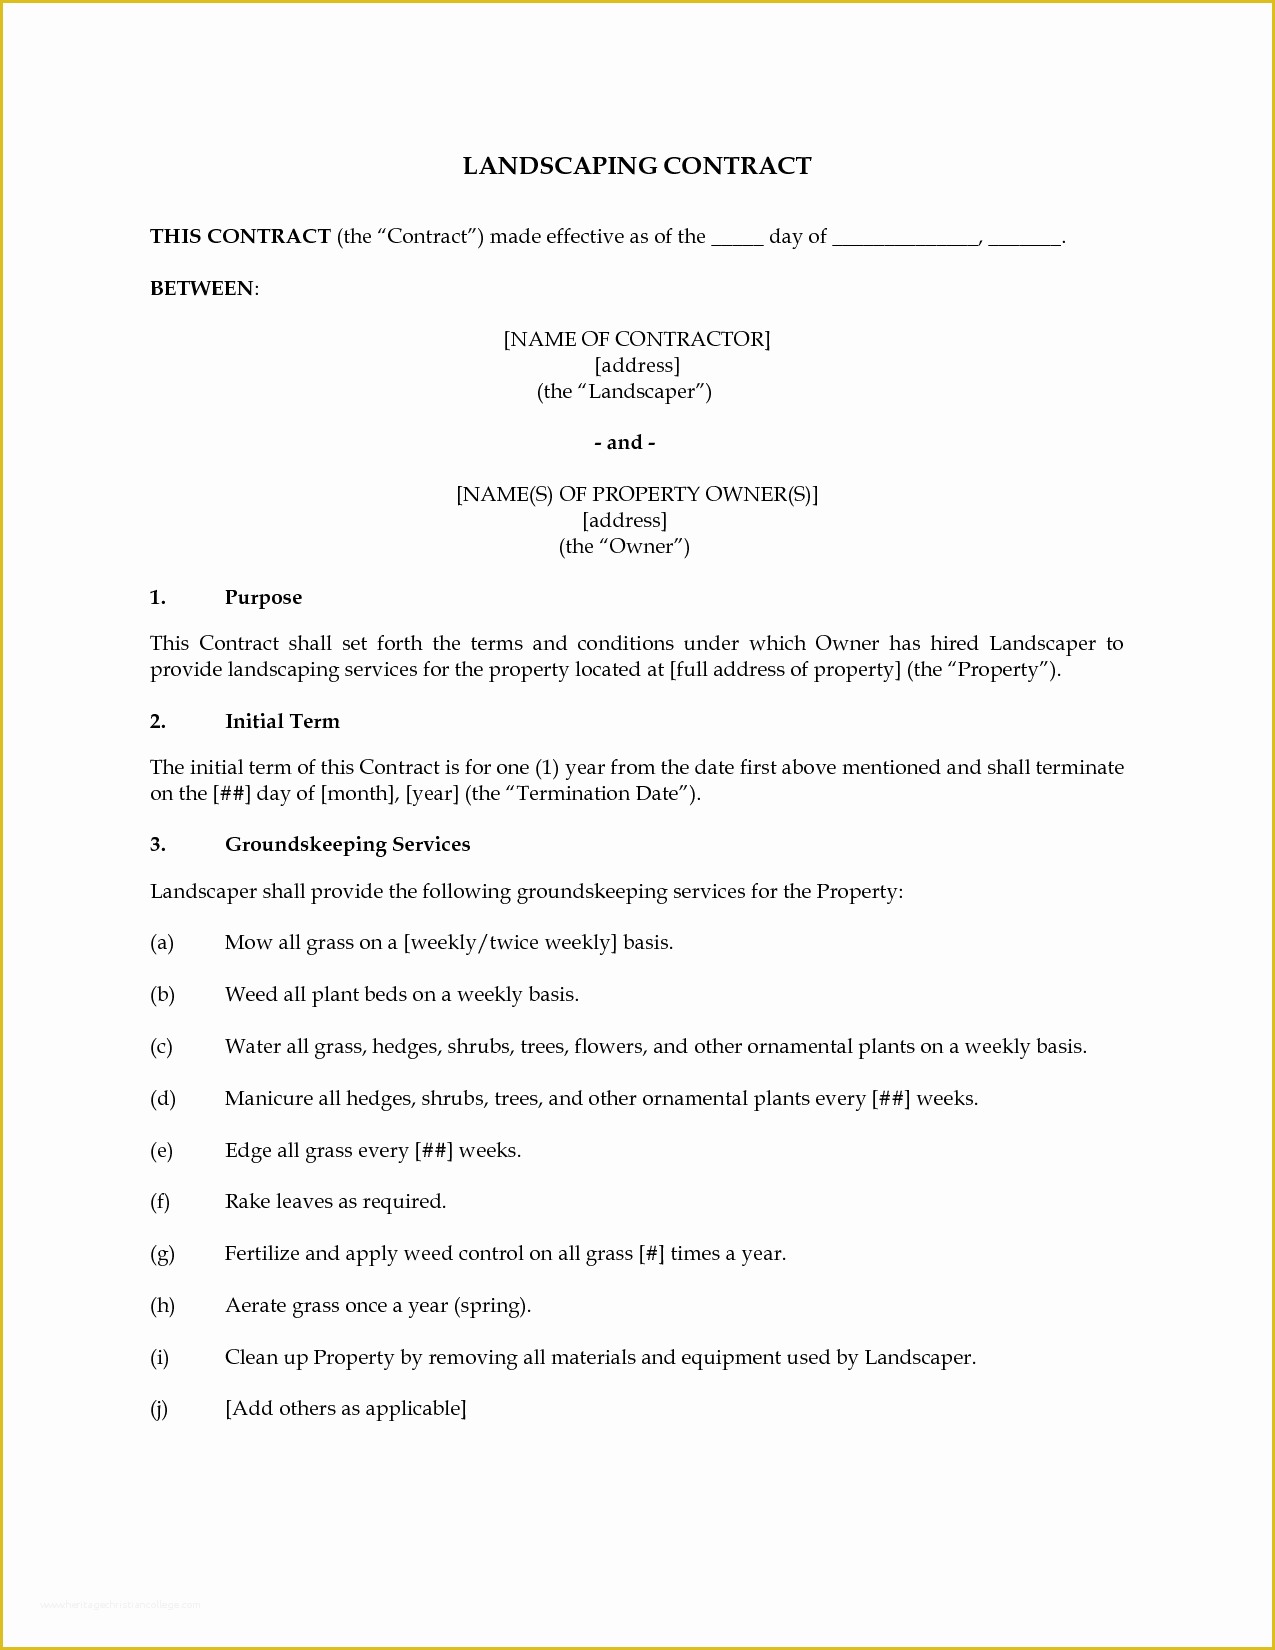 Lawn Care Contract Template Free Of Easy and Fast Lawn Care Landscaping